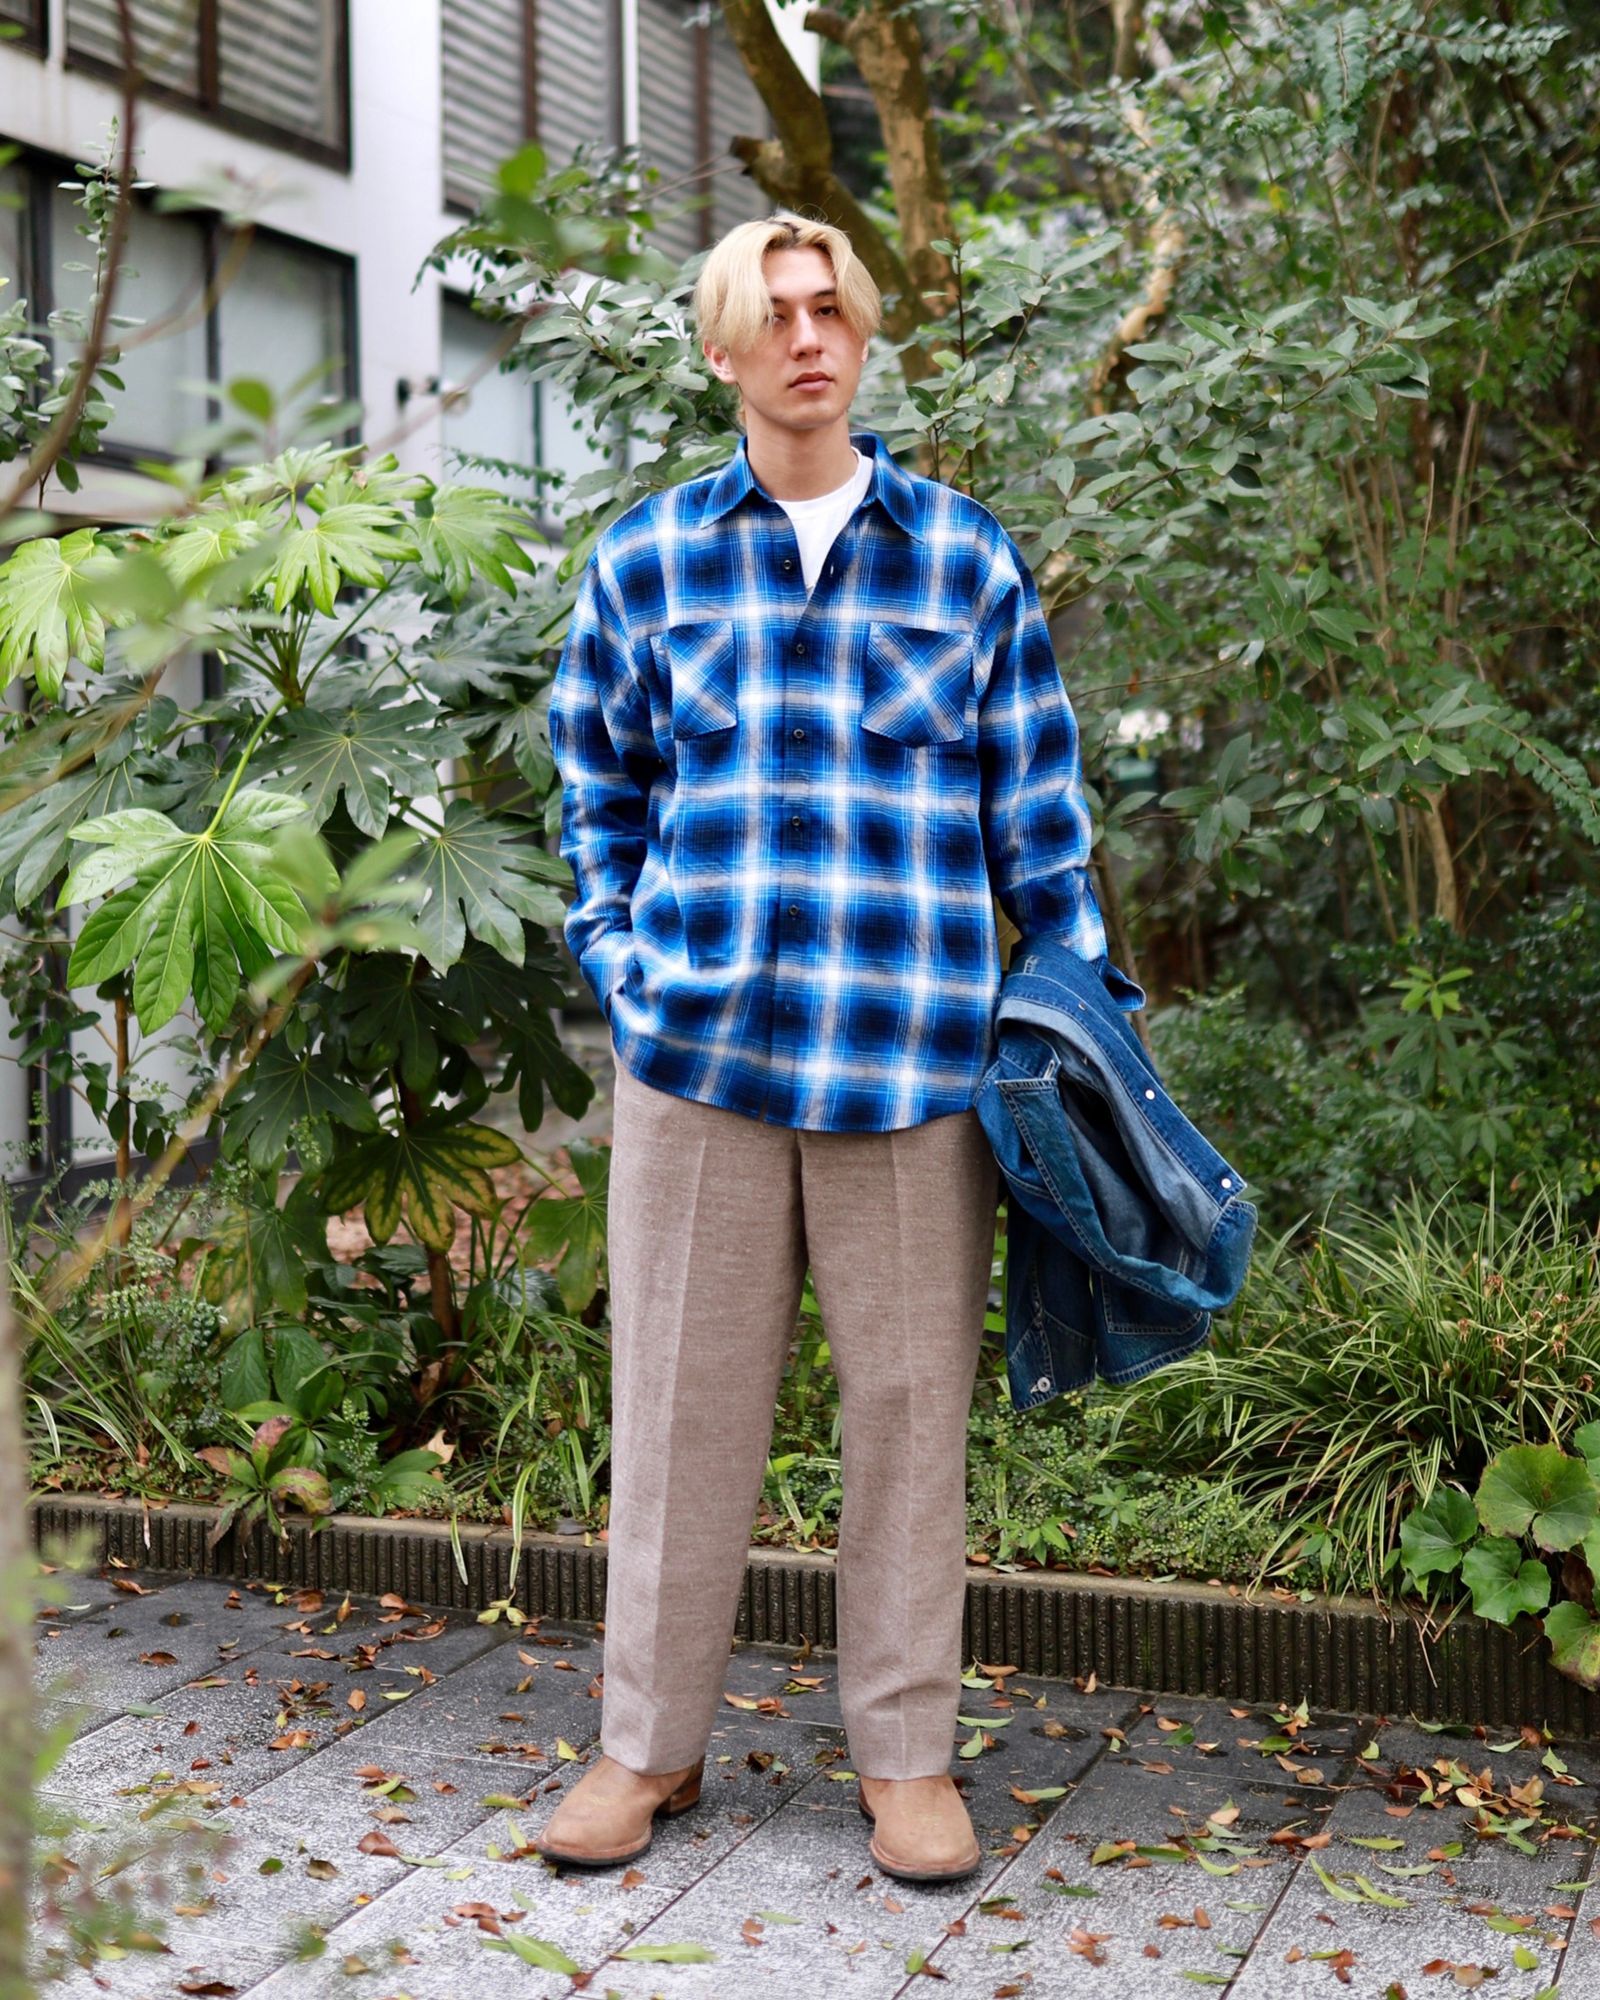 A.PRESSE - アプレッセ23SS Dead Stock Linen Trousers(23SAP-04-19M 